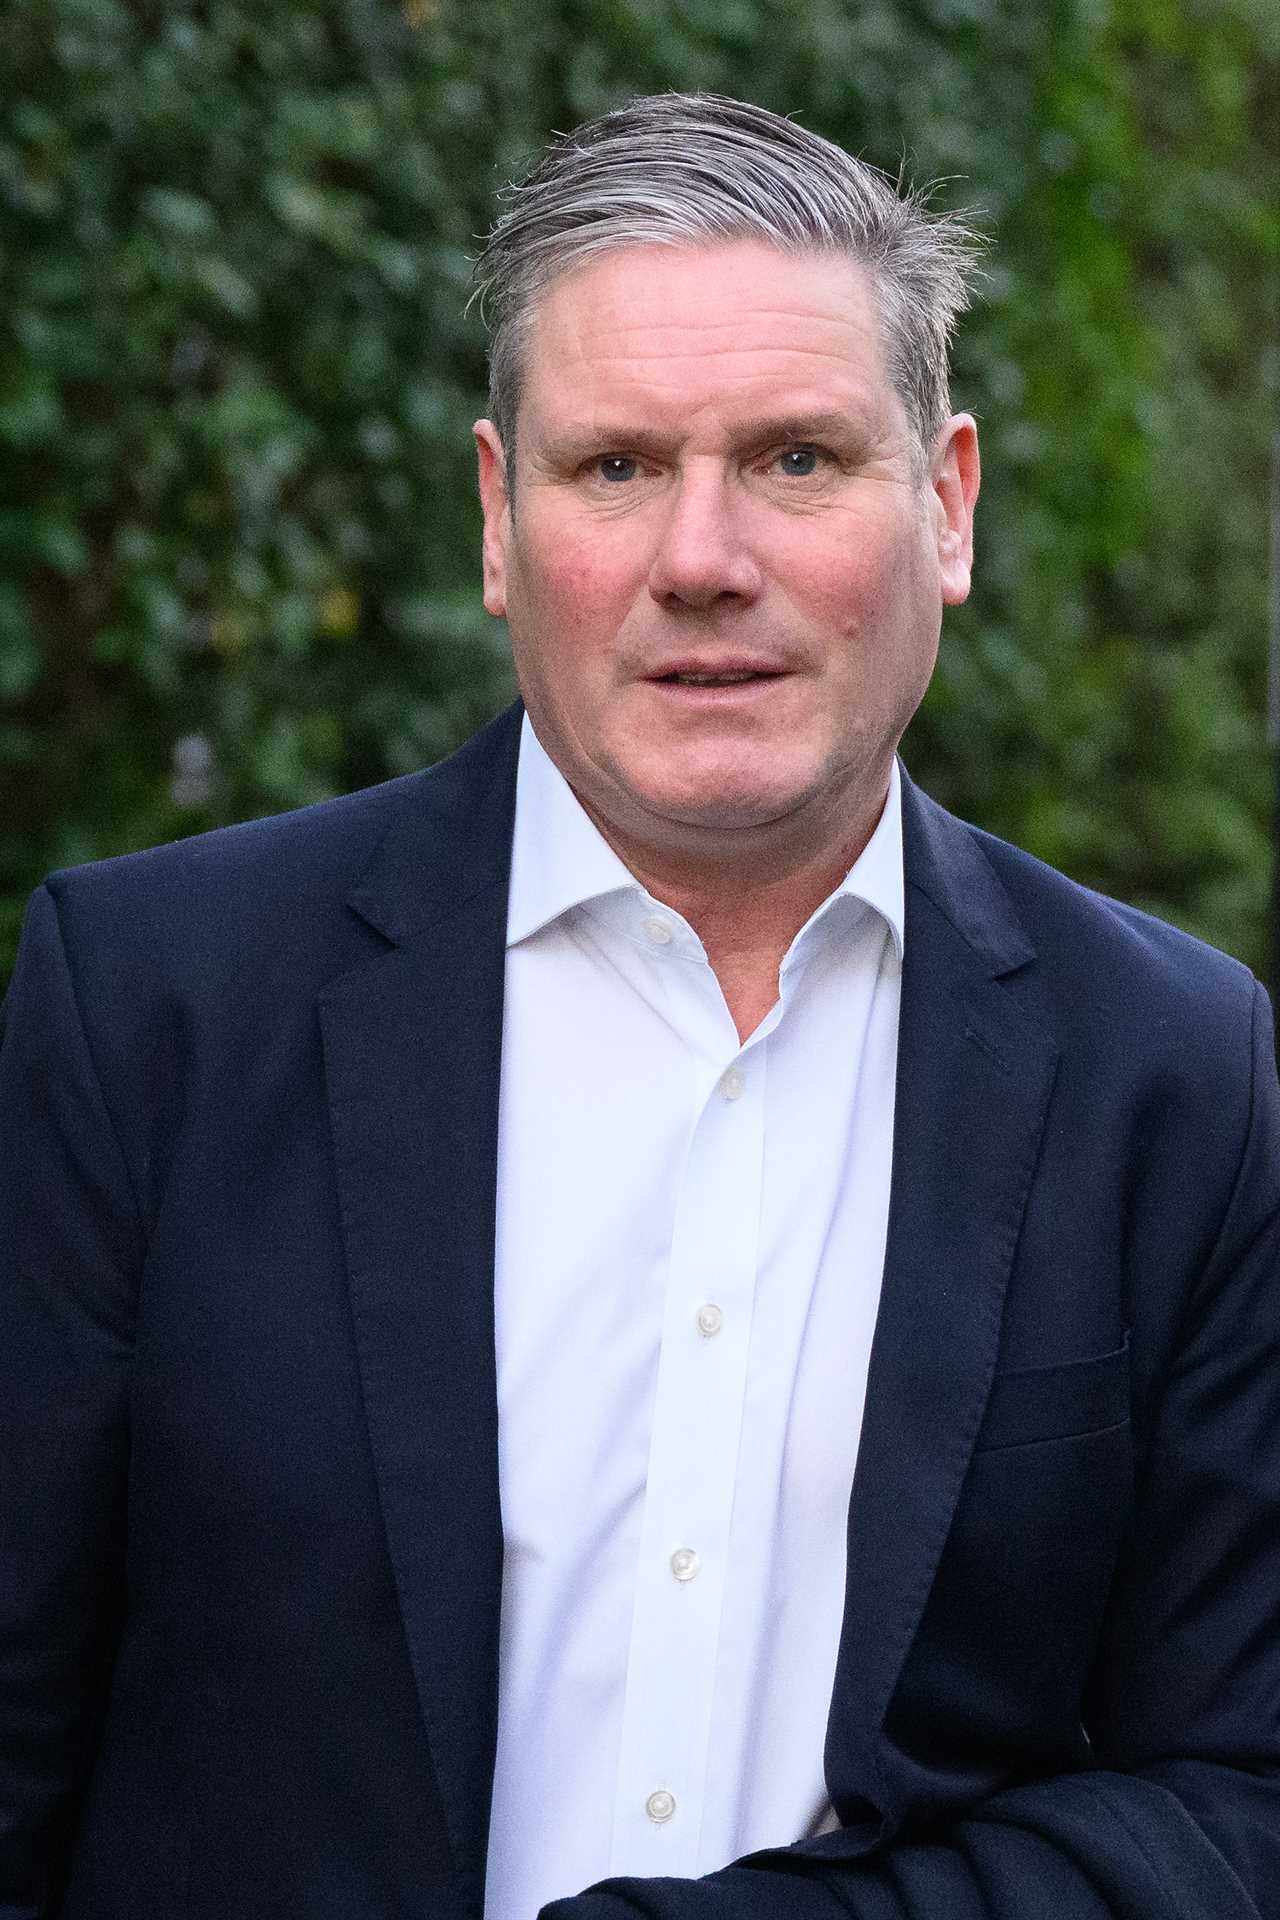 Sir Keir Starmer reveals his relationship with Sue Gray dates back at least TEN YEARS